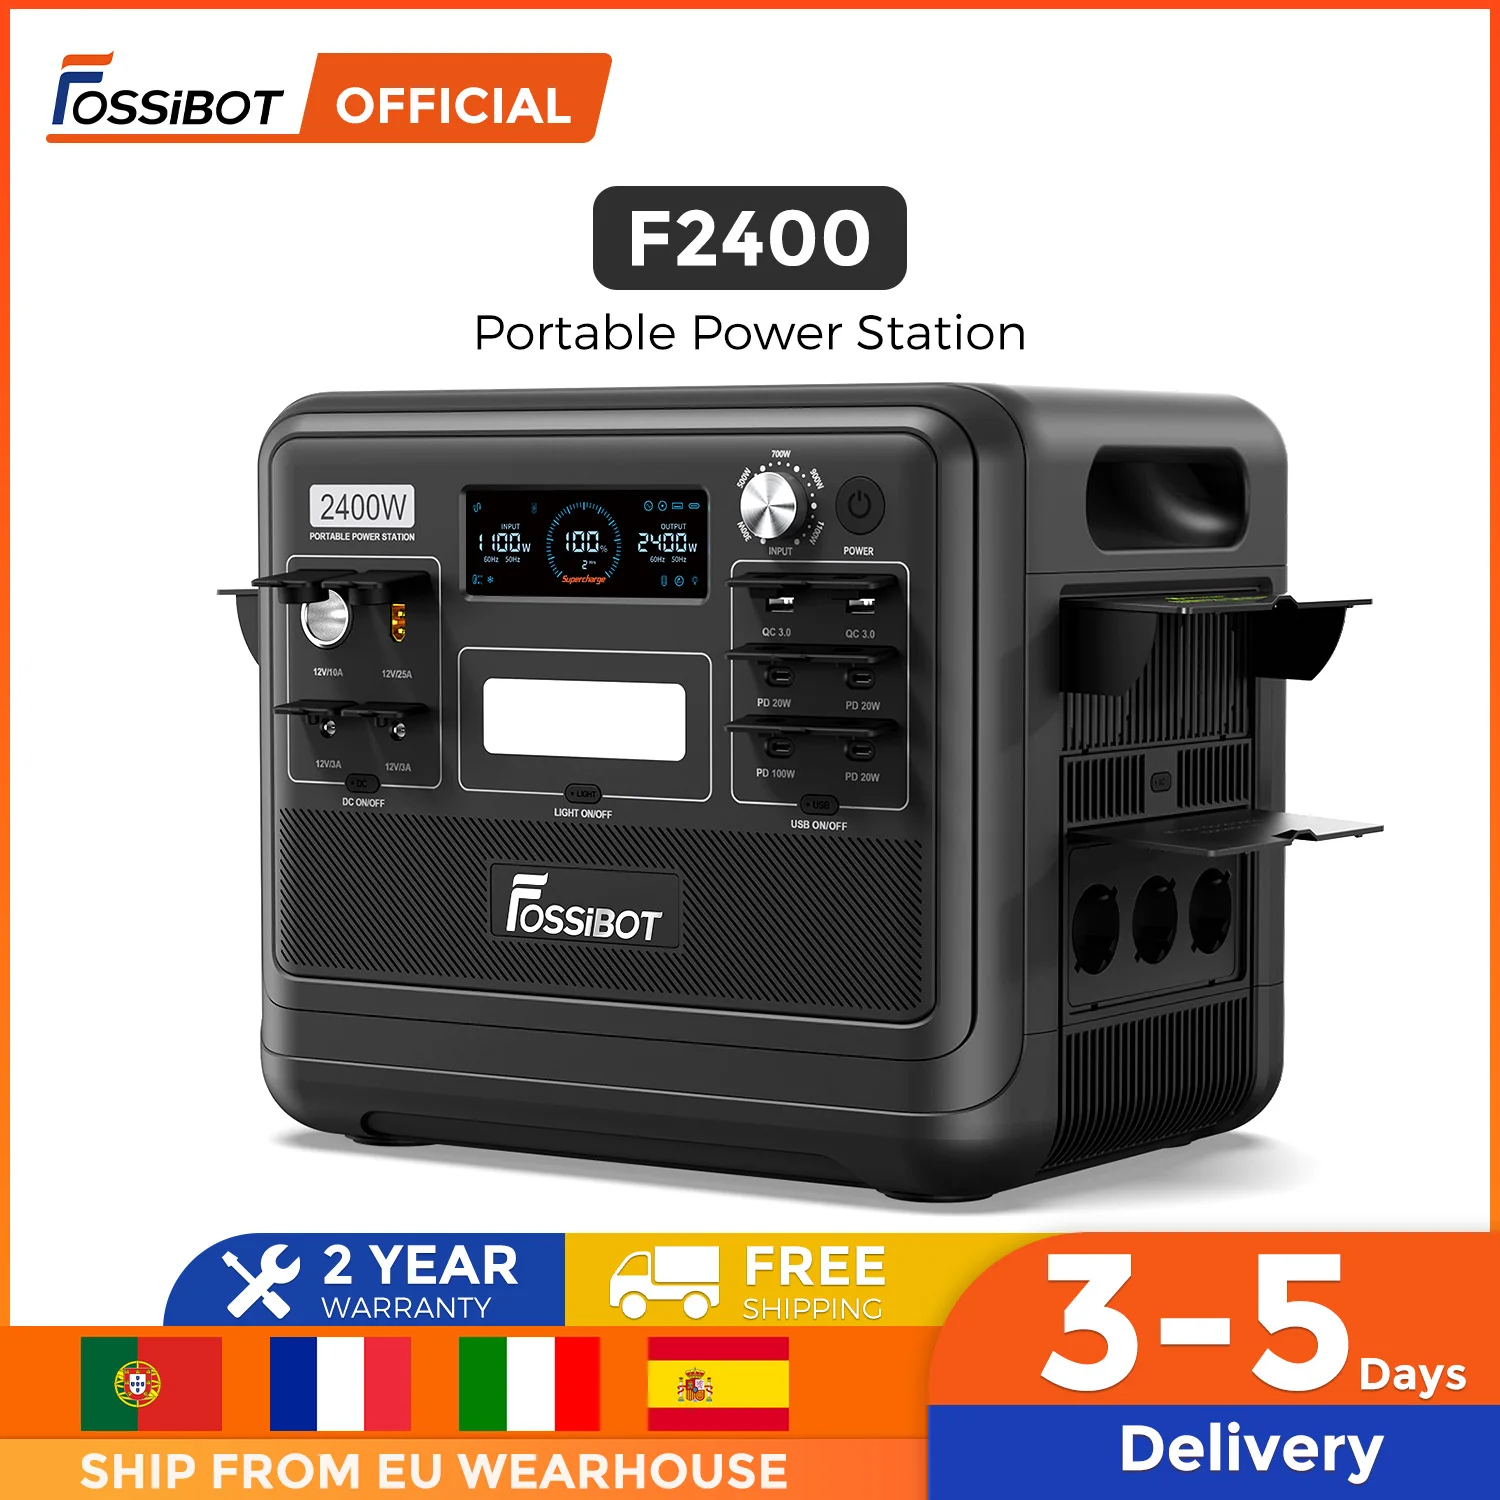 FOSSiBOT F2400 Portable Power Station 2048Wh LiFePO4 Battery 2400W Output Solar Generator 16 Output Ports Energy Power